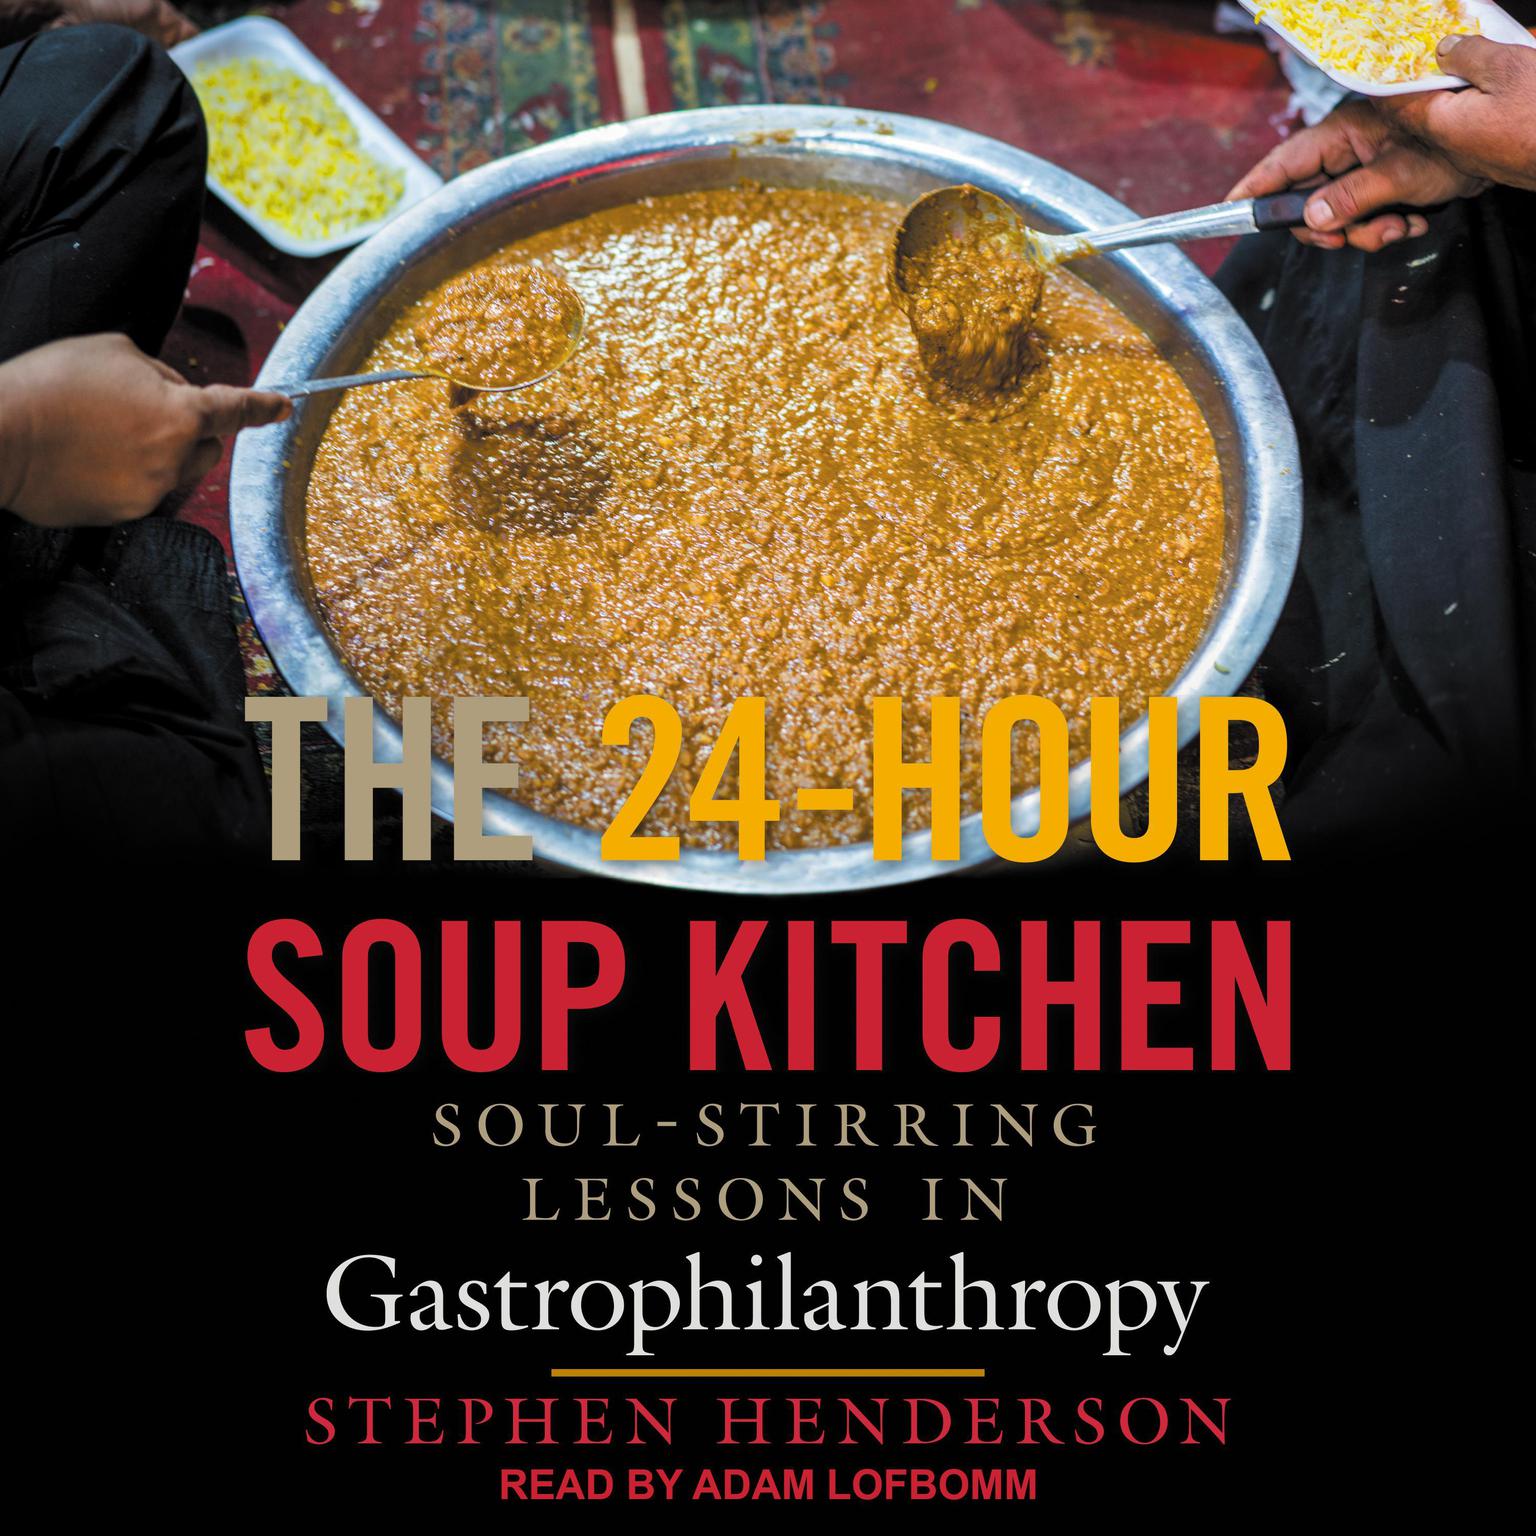 The 24-Hour Soup Kitchen: Soul-Stirring Lessons in Gastrophilanthropy Audiobook, by Stephen Henderson